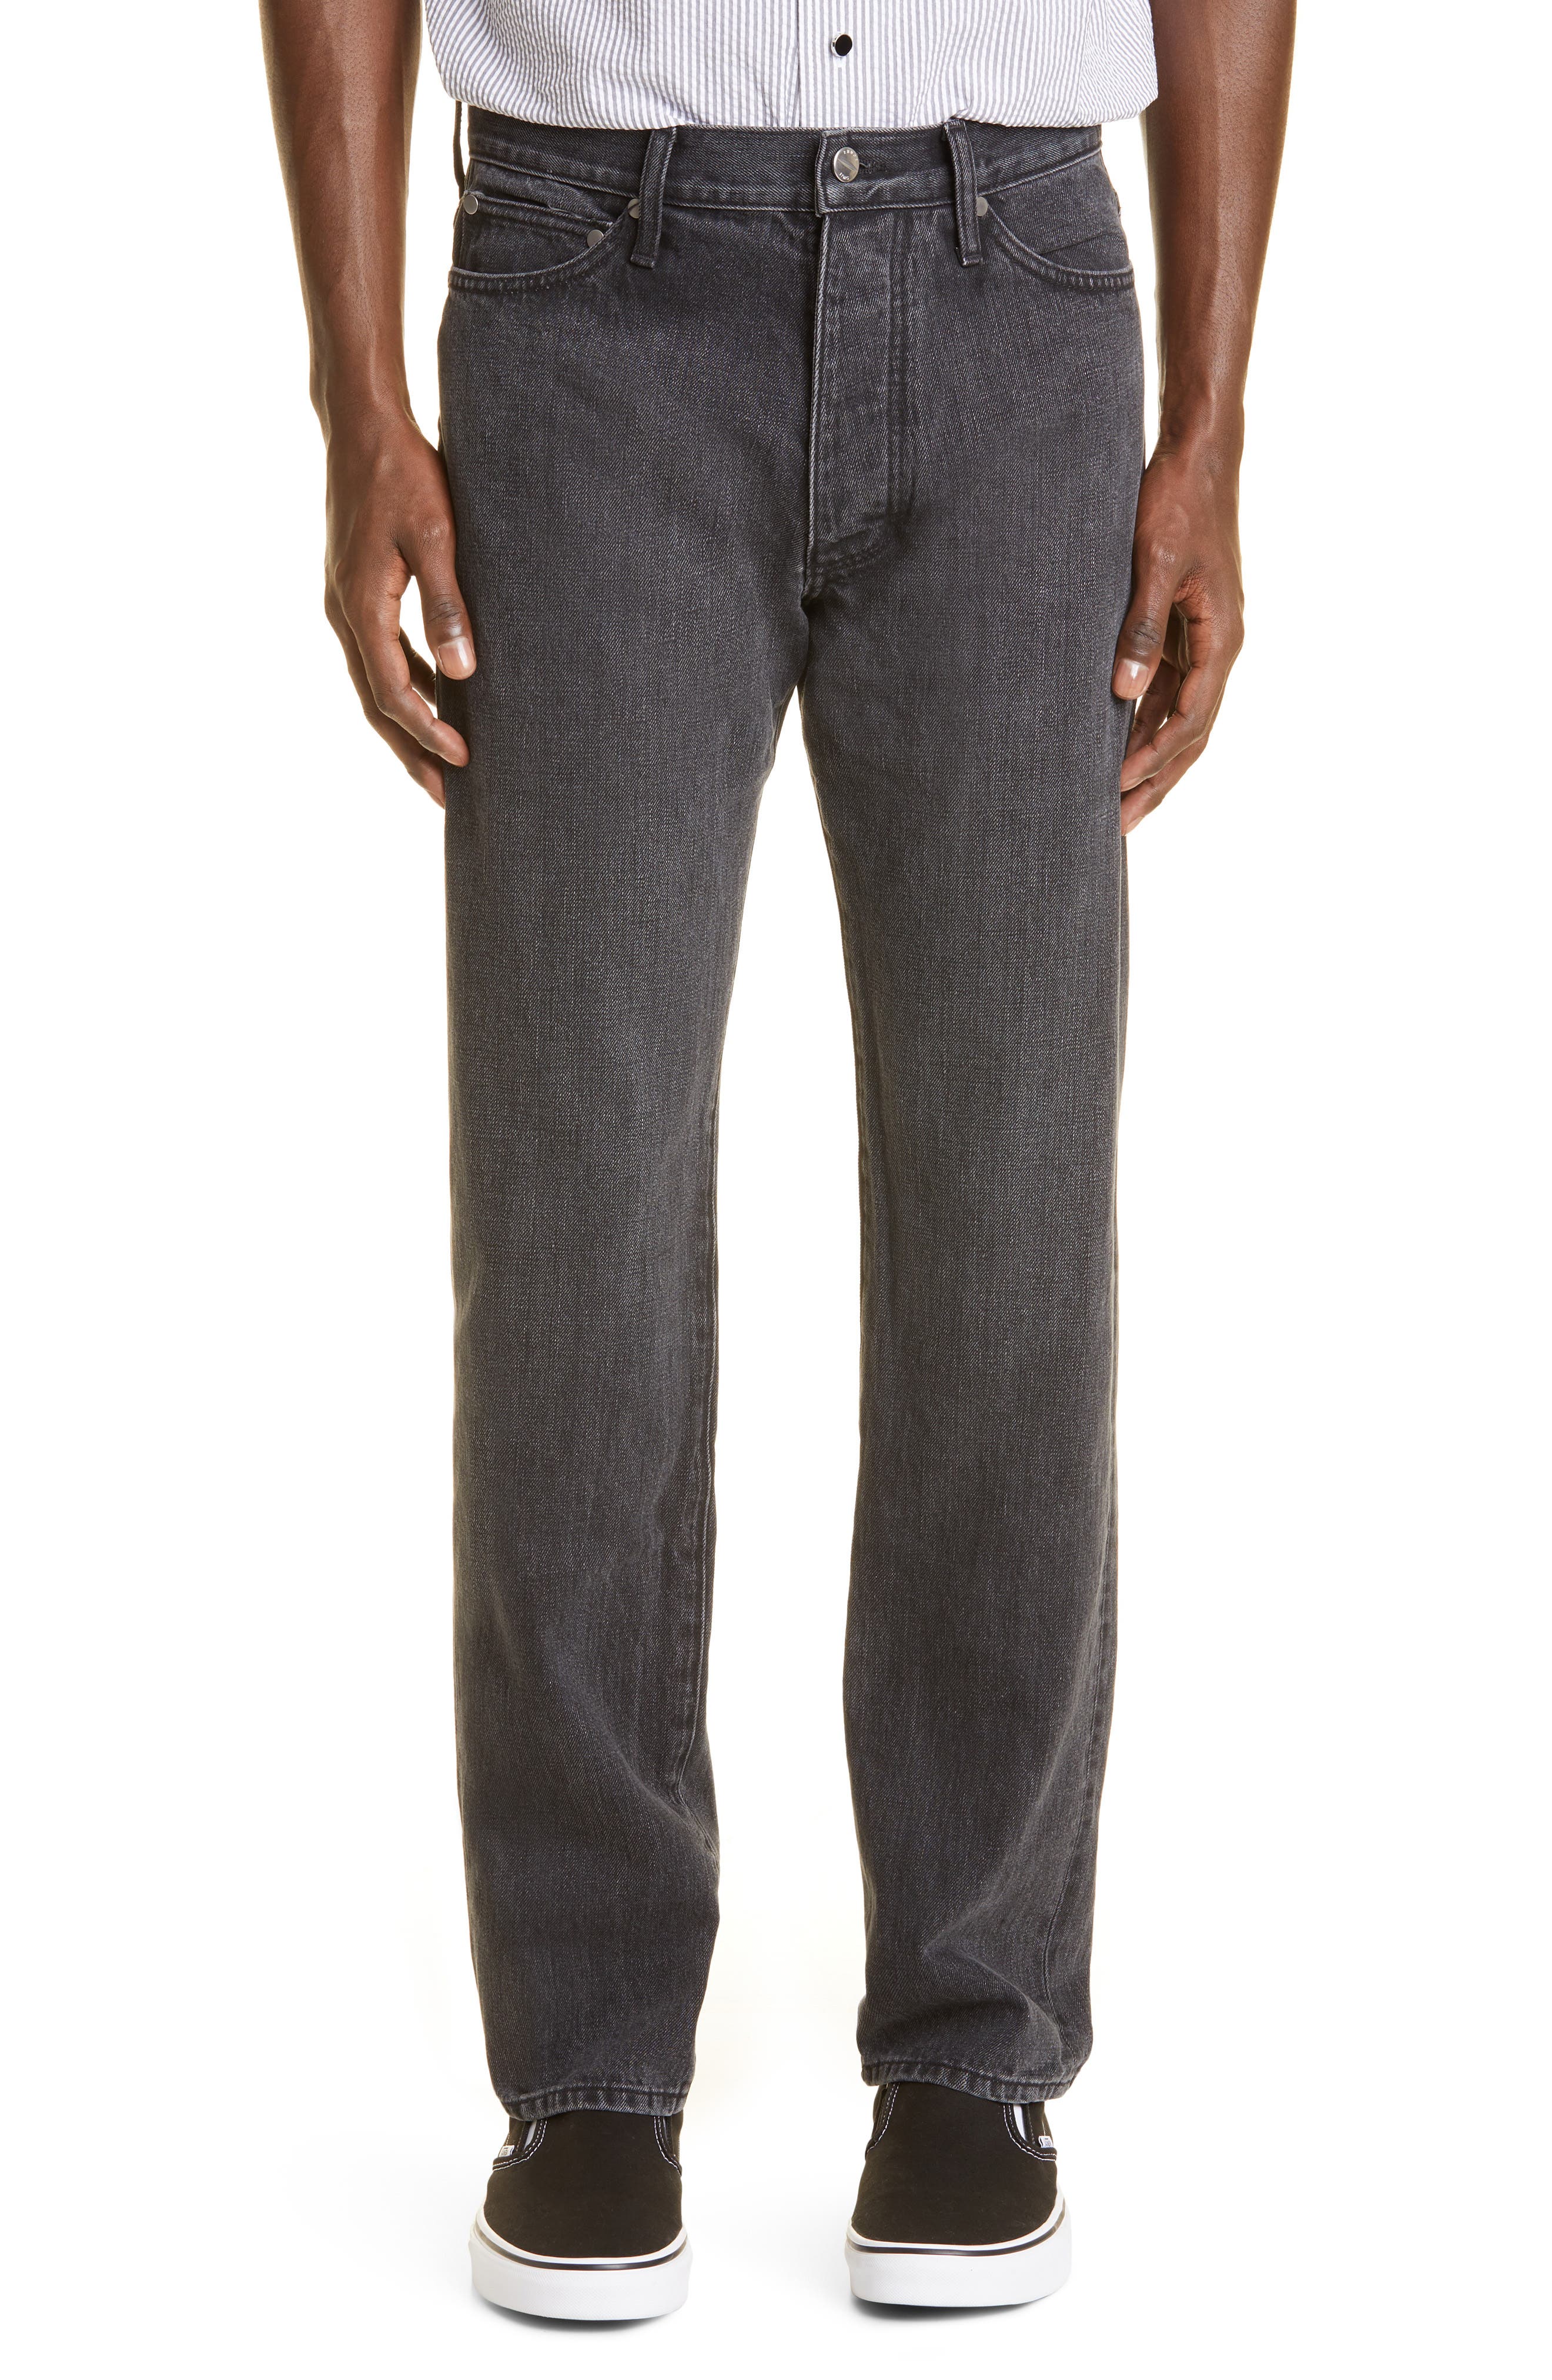 Rhude Classic Fit Jeans in Black at Nordstrom, Size 28